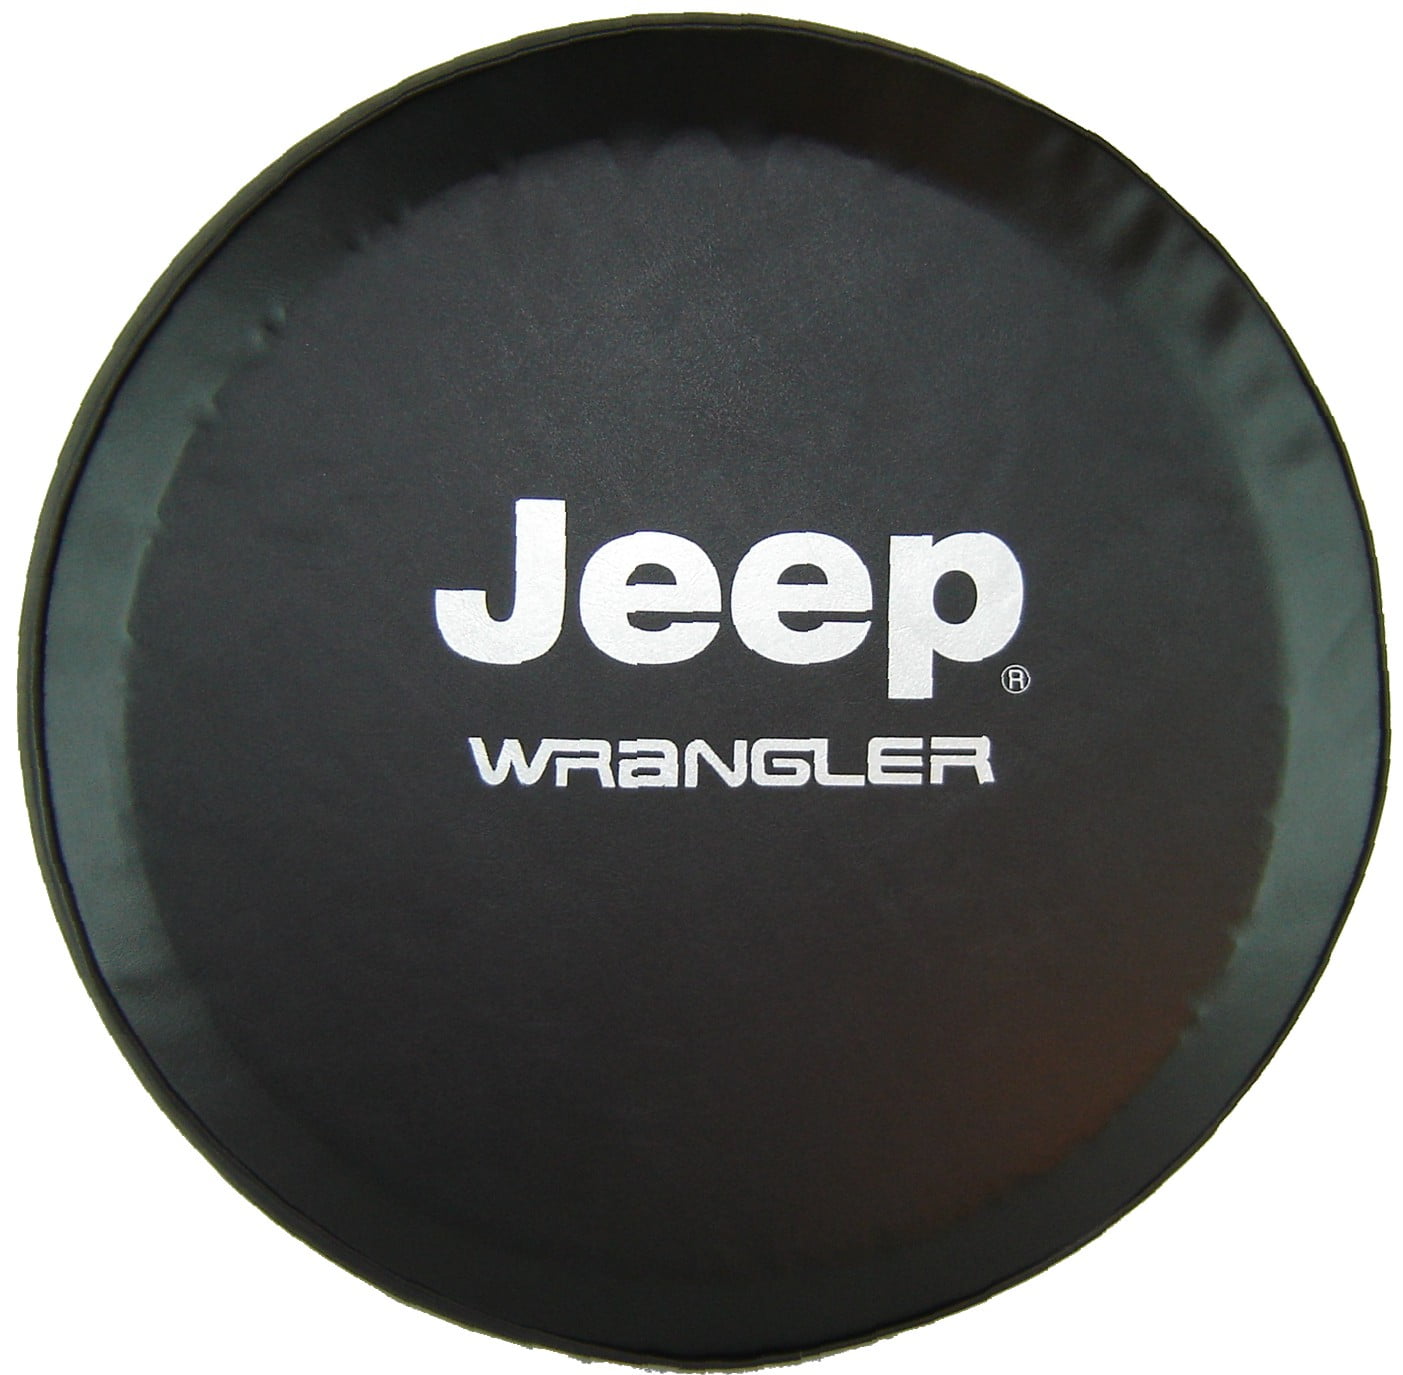 SpareCover - ABC Series Jeep Wrangler in Black on 32 inch Medium Tan Heavy  Vinyl Tire Cover - Made in USA only 